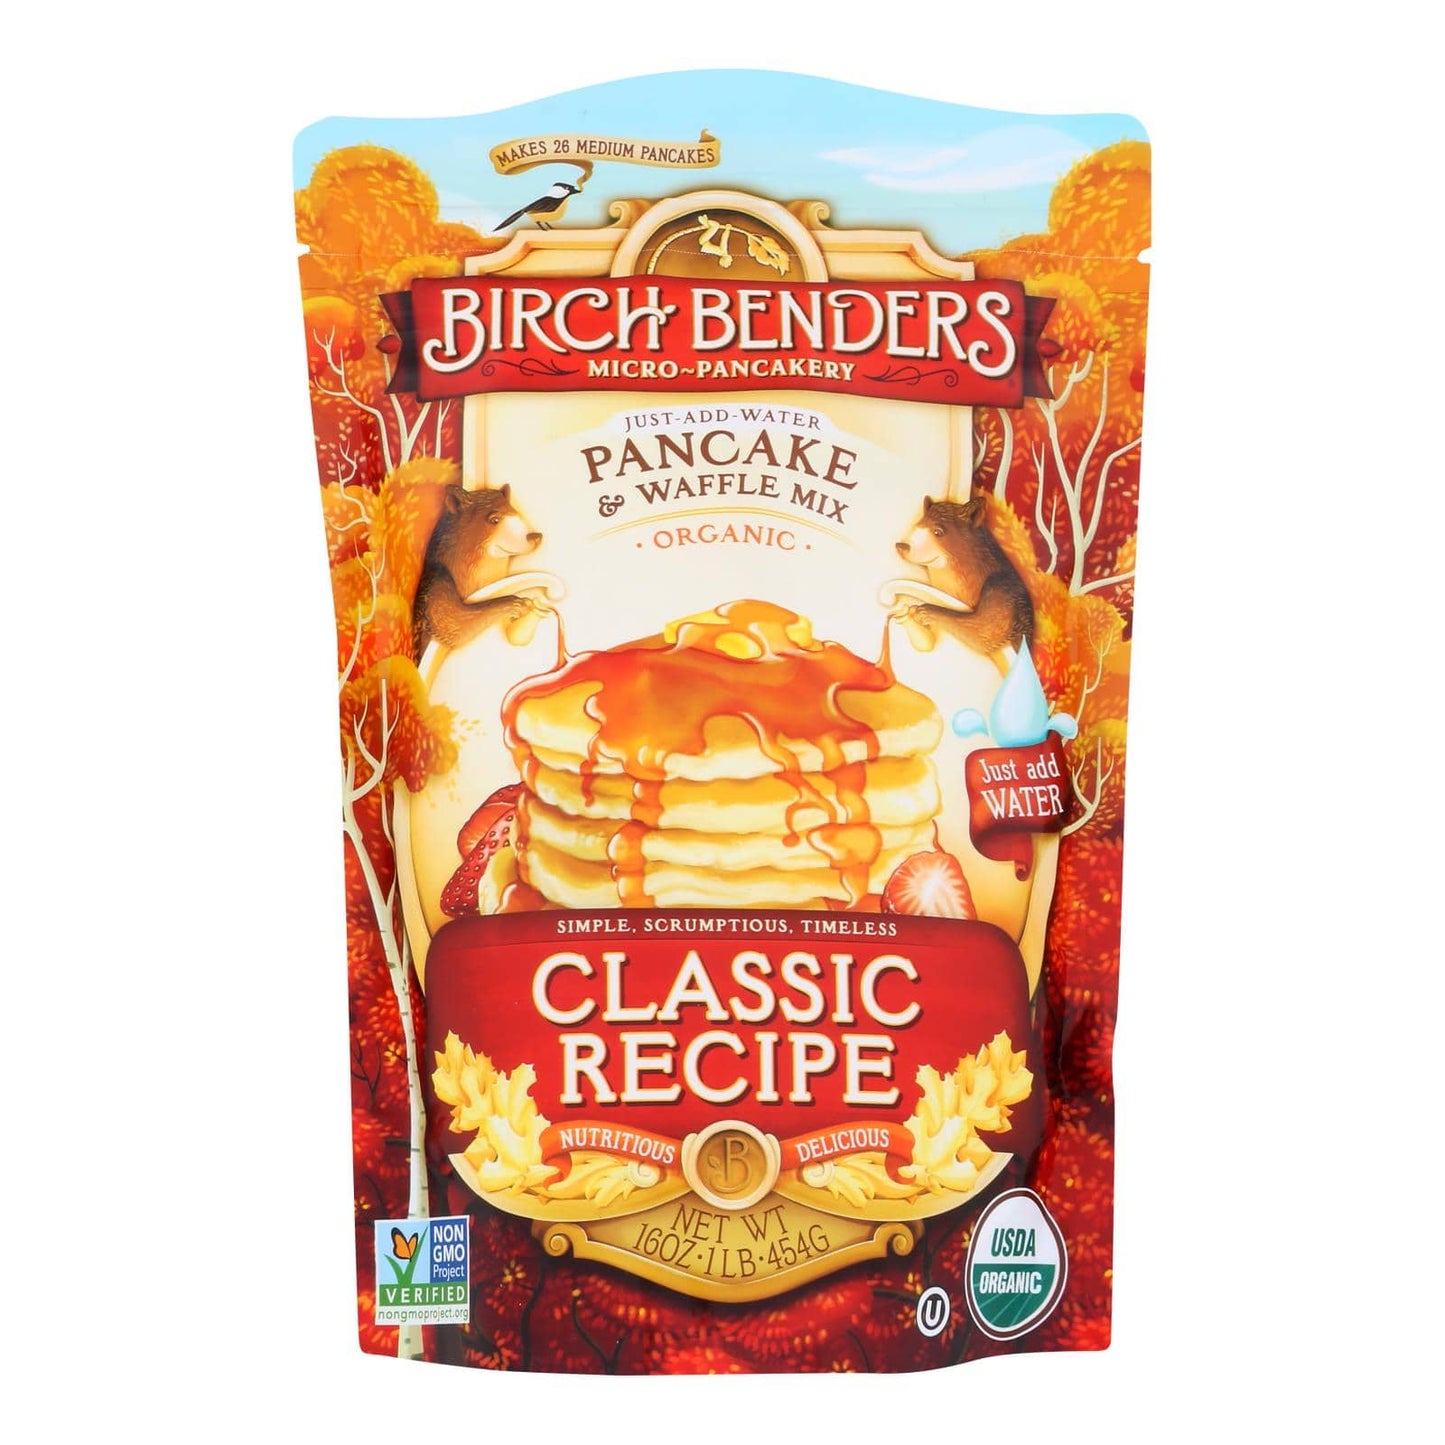 Buy Birch Benders Pancake And Waffle Mix - Classic - Case Of 6 - 16 Oz.  at OnlyNaturals.us